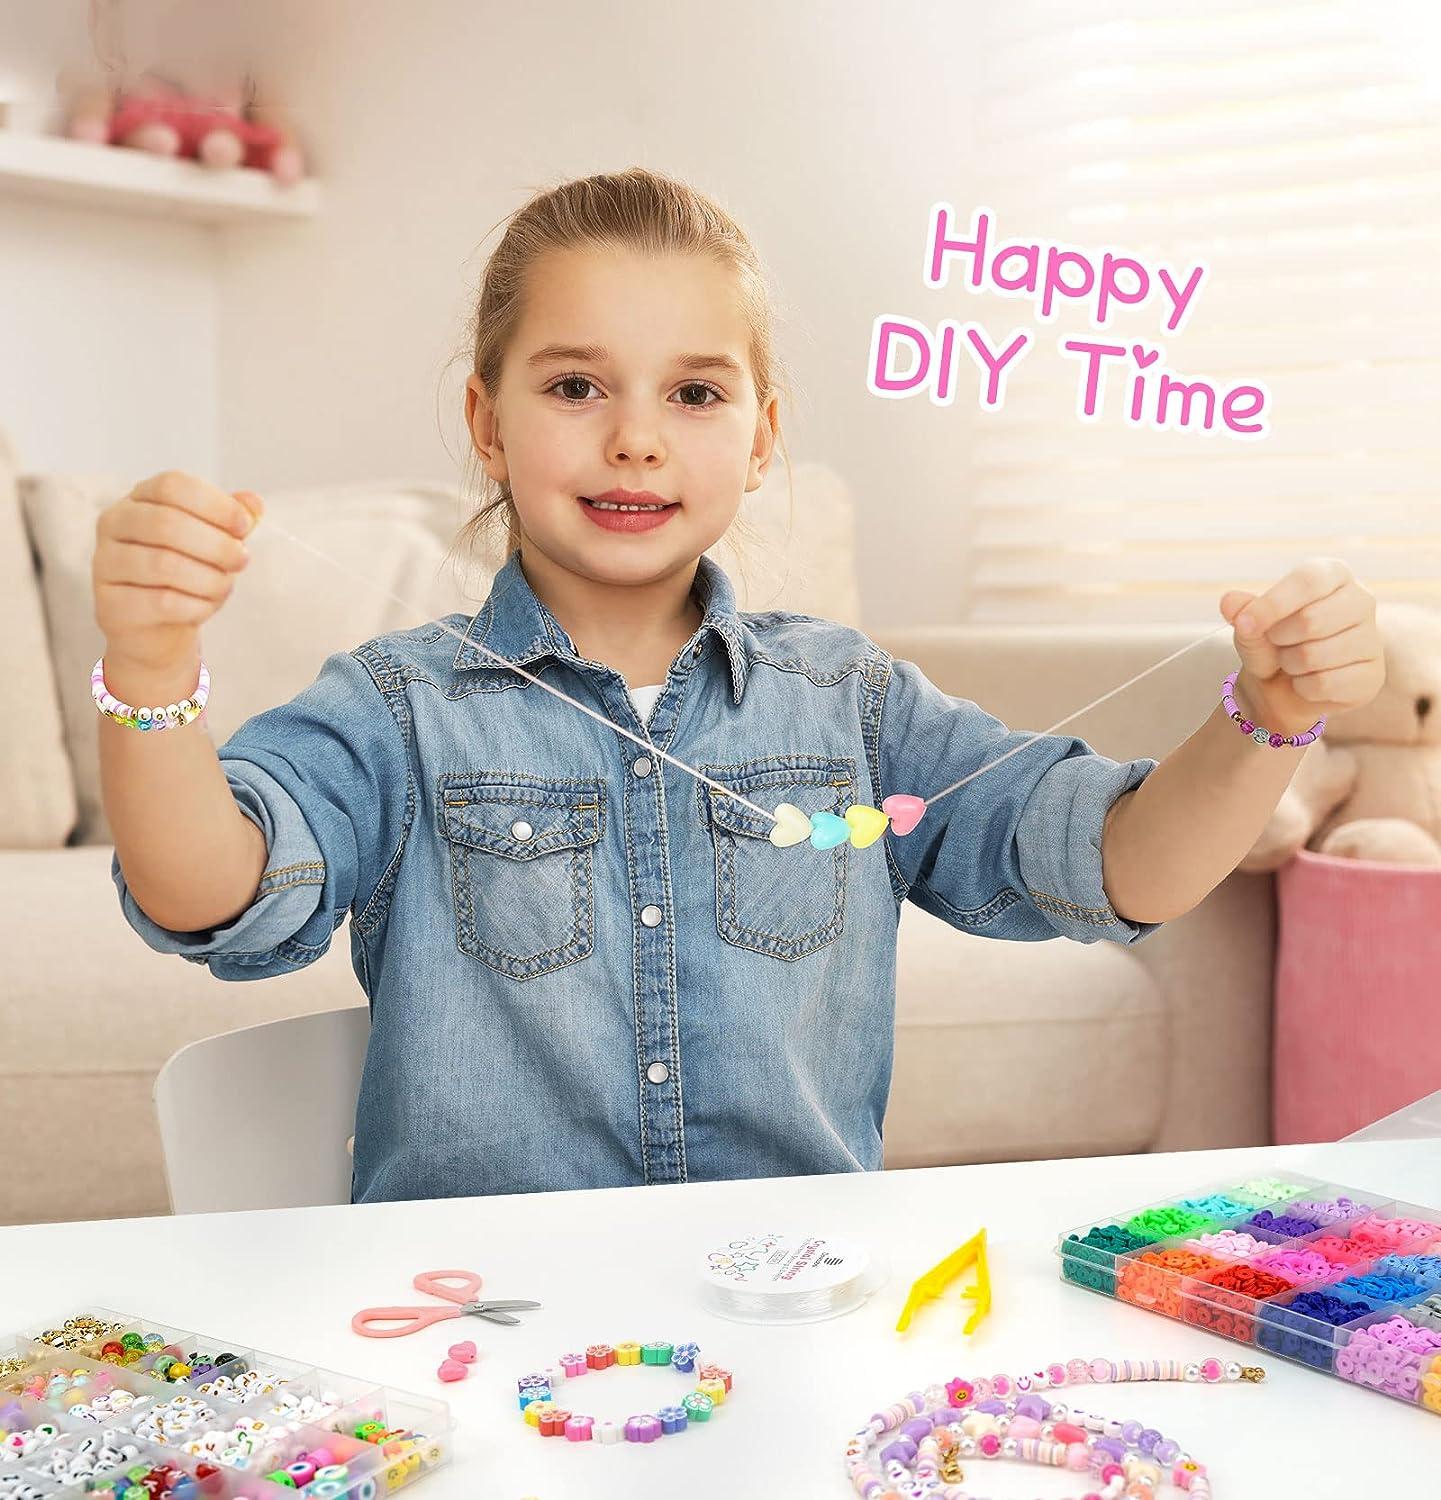 Giving Smiles With Alphabet Beads Loom Band Bracelets Craft! - Fun